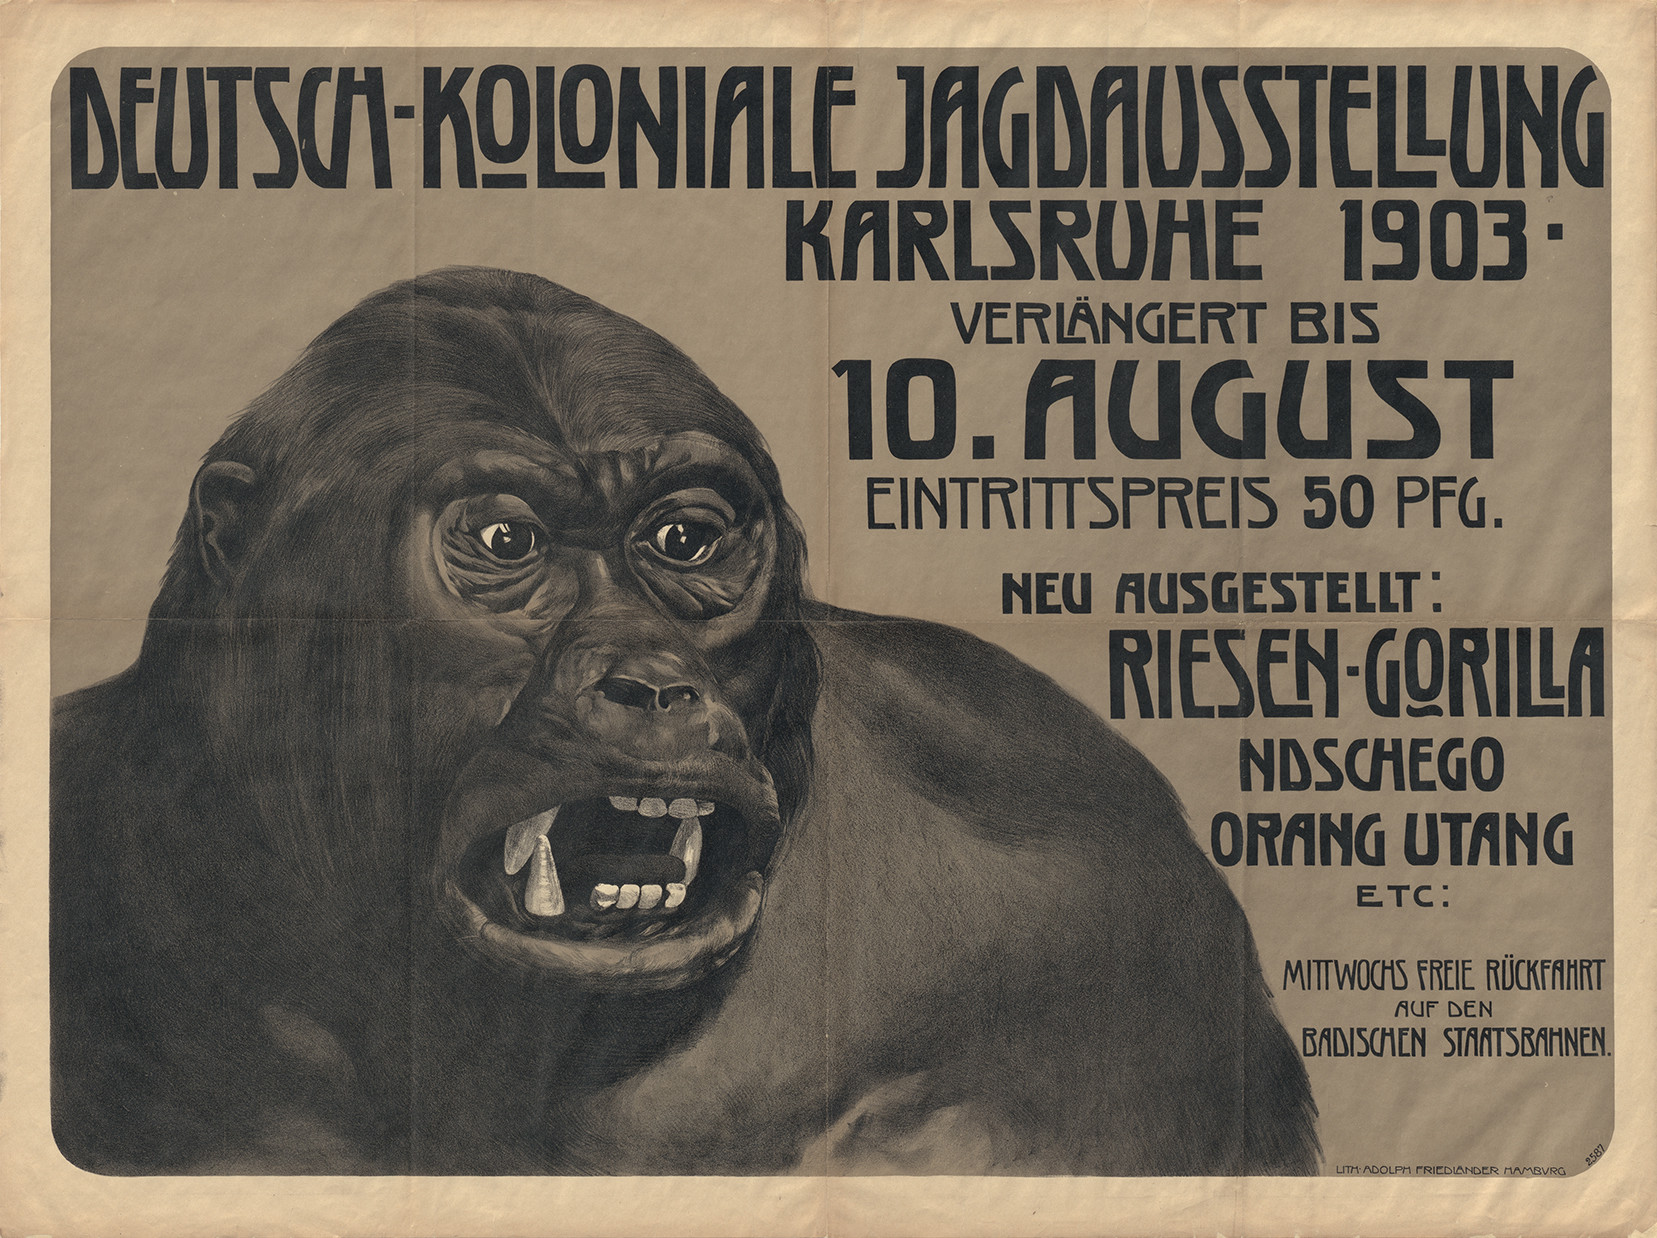 Black-and-white image with printed text: "German colonial hunting exhibition, Karlsruhe 1903. Extended until 10 August; entry 50 Pfg. New exhibit: Giant gorilla, Ndschego, Orang Utang, etc: Free return trip with the Badische Staatsbahnen on Wednesday." On the left, bordered by the text is an image of the head and shoulders of a gorilla with starting eyes and its mouth wide open, revealing its large white teeth.